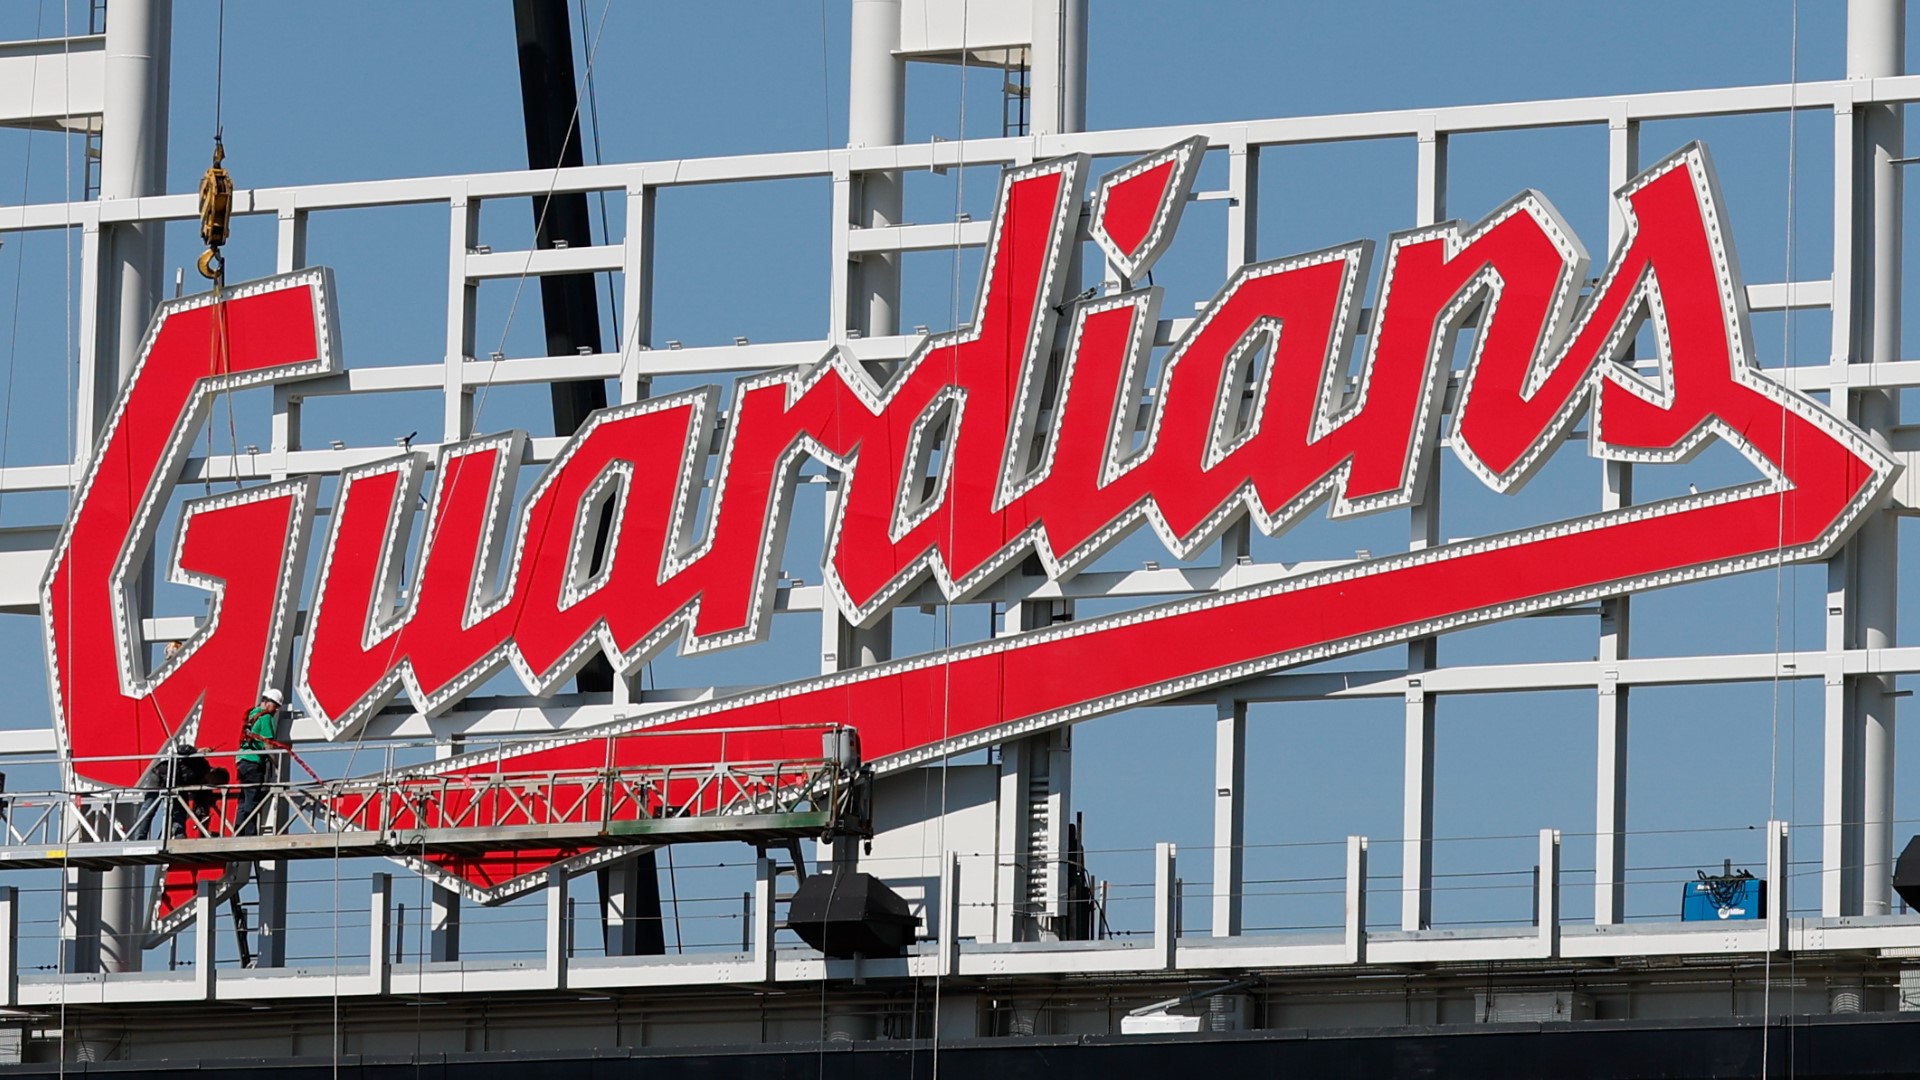 Here's what you need to know if you're going to Progressive Field as the Cleveland Guardians battle the Tampa Bay Rays.